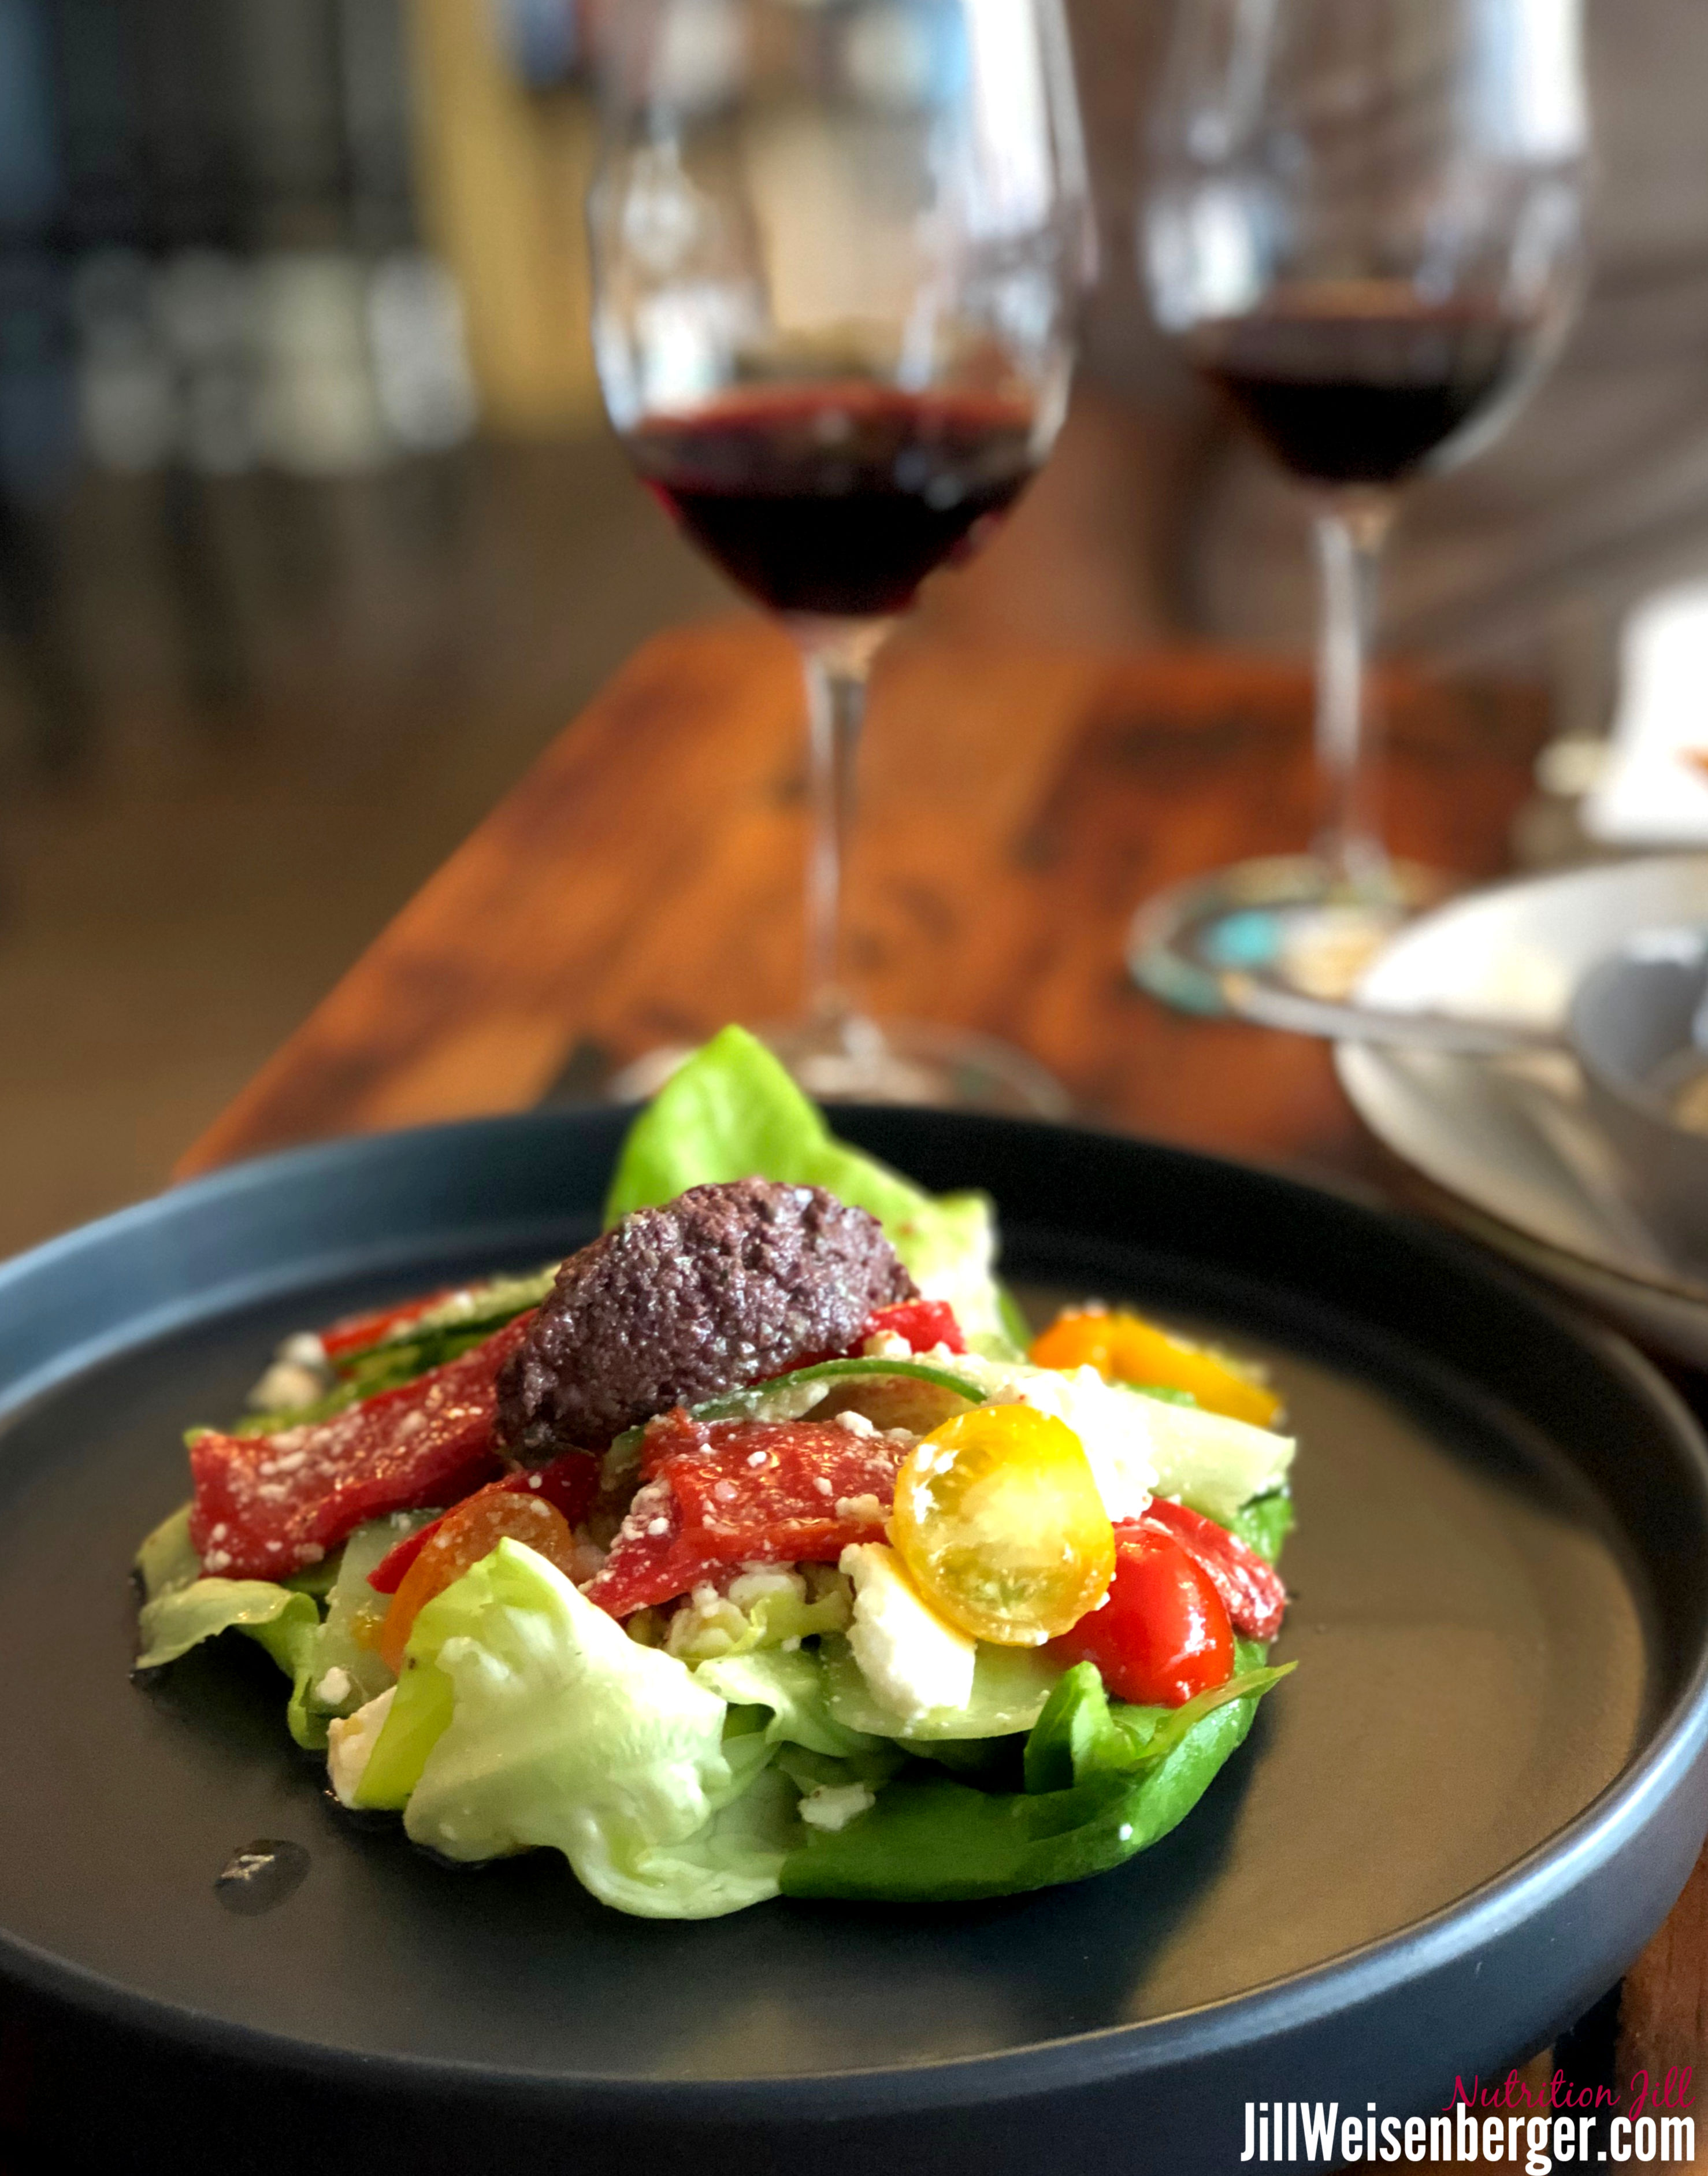 healthy eating out: salad with red wine